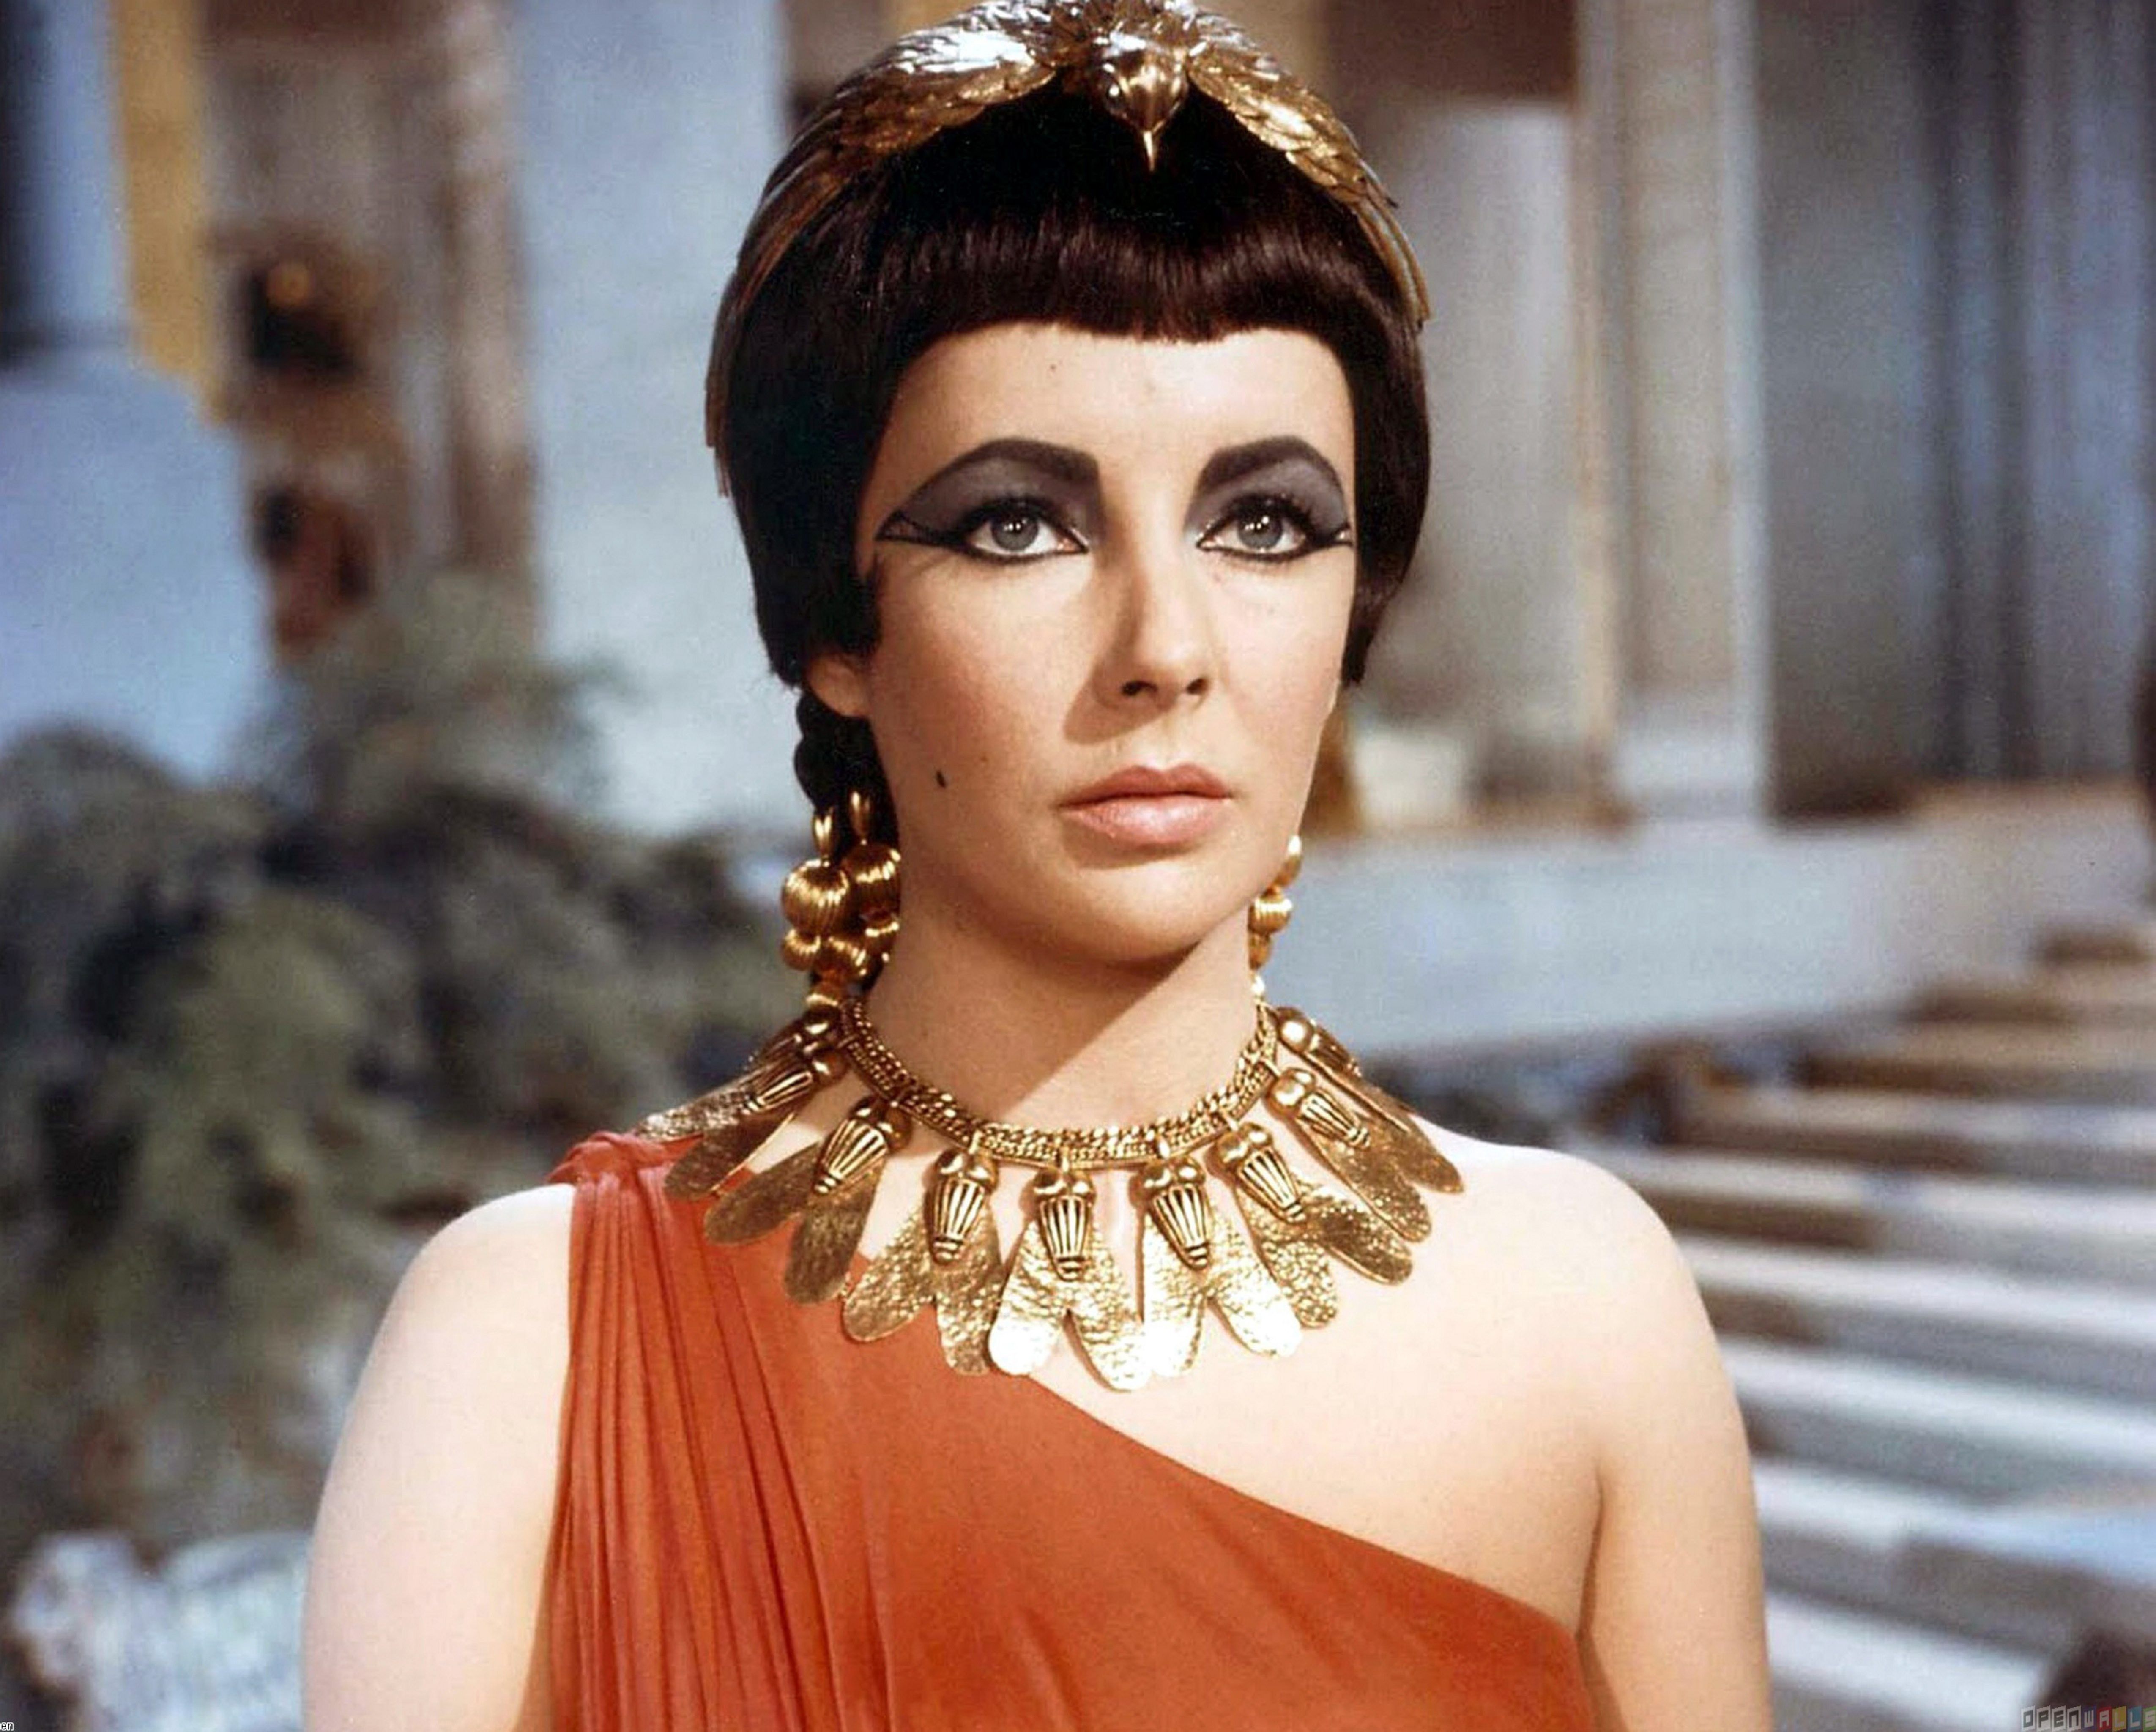 Egyptian Hairstyles And Makeup